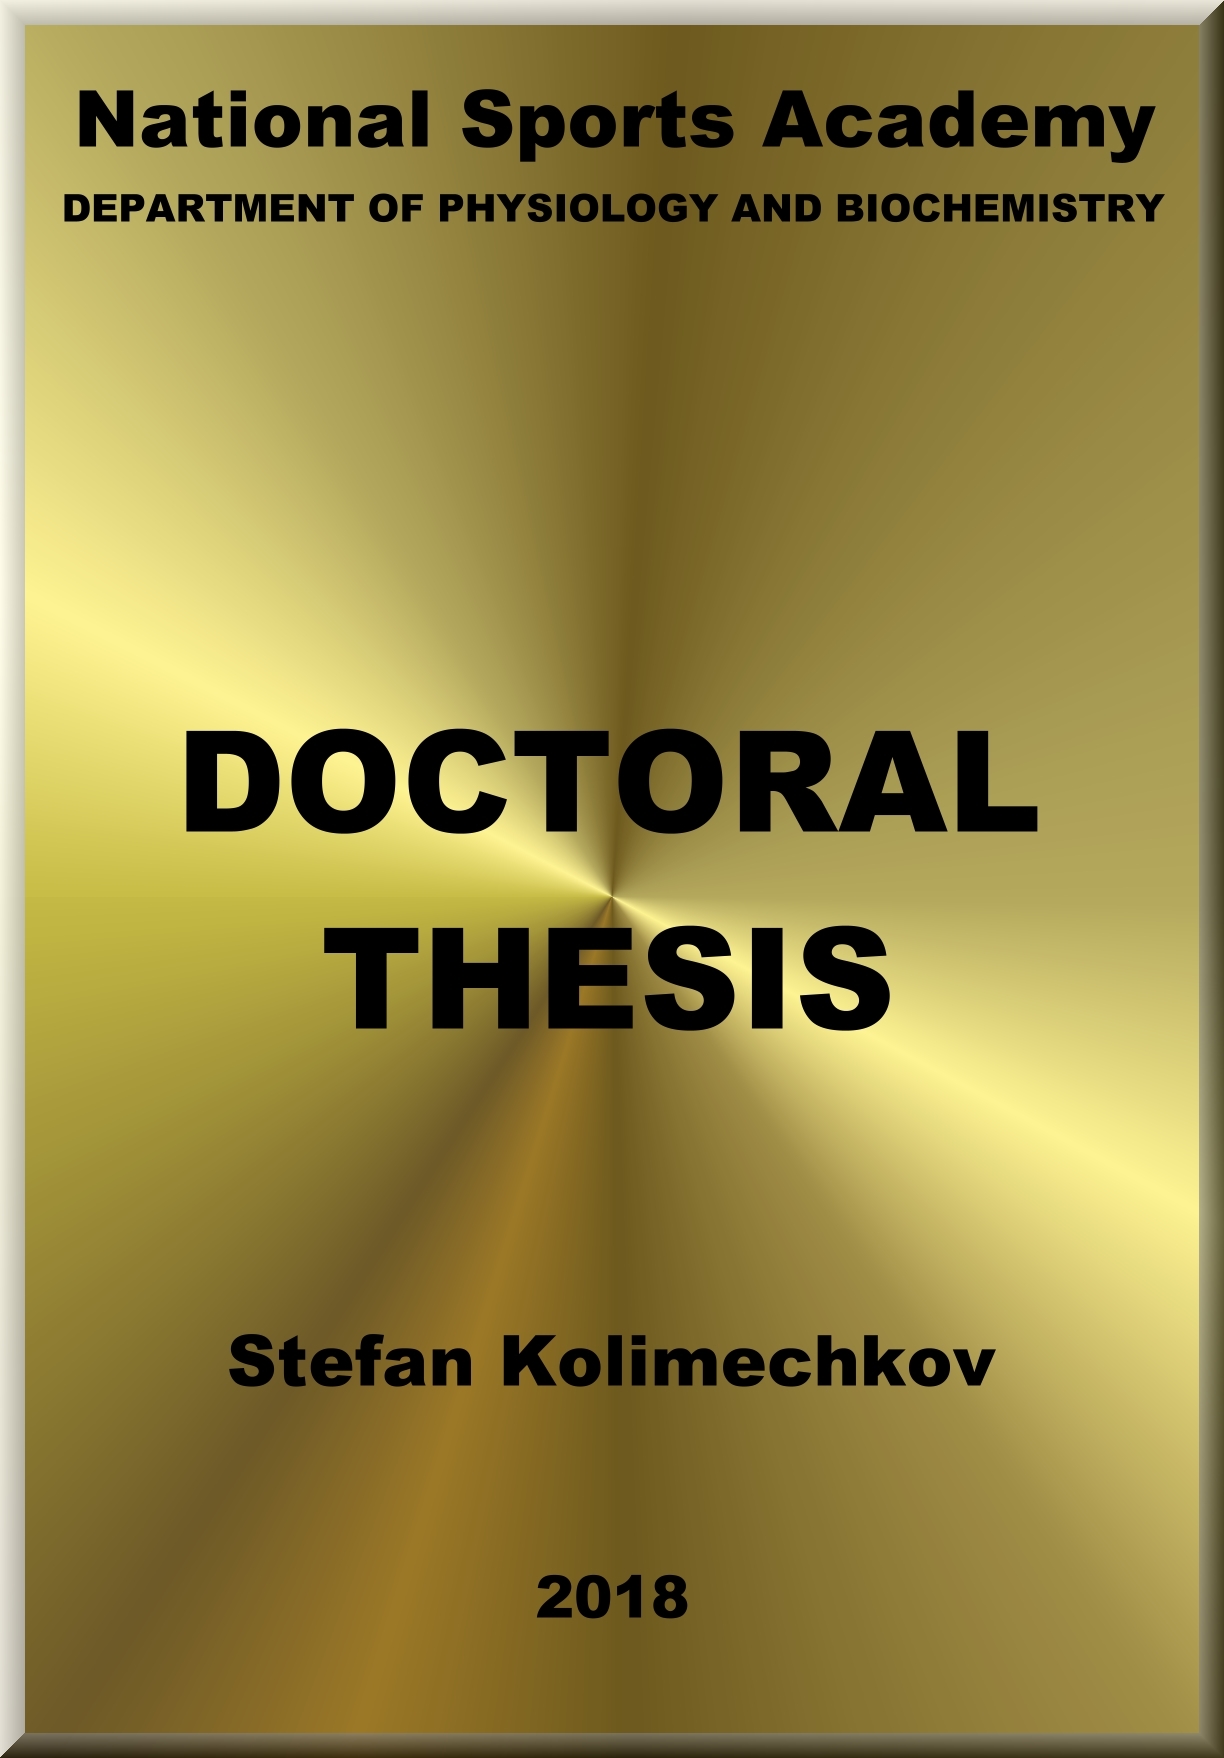 Doctoral Thesis in Physical Education